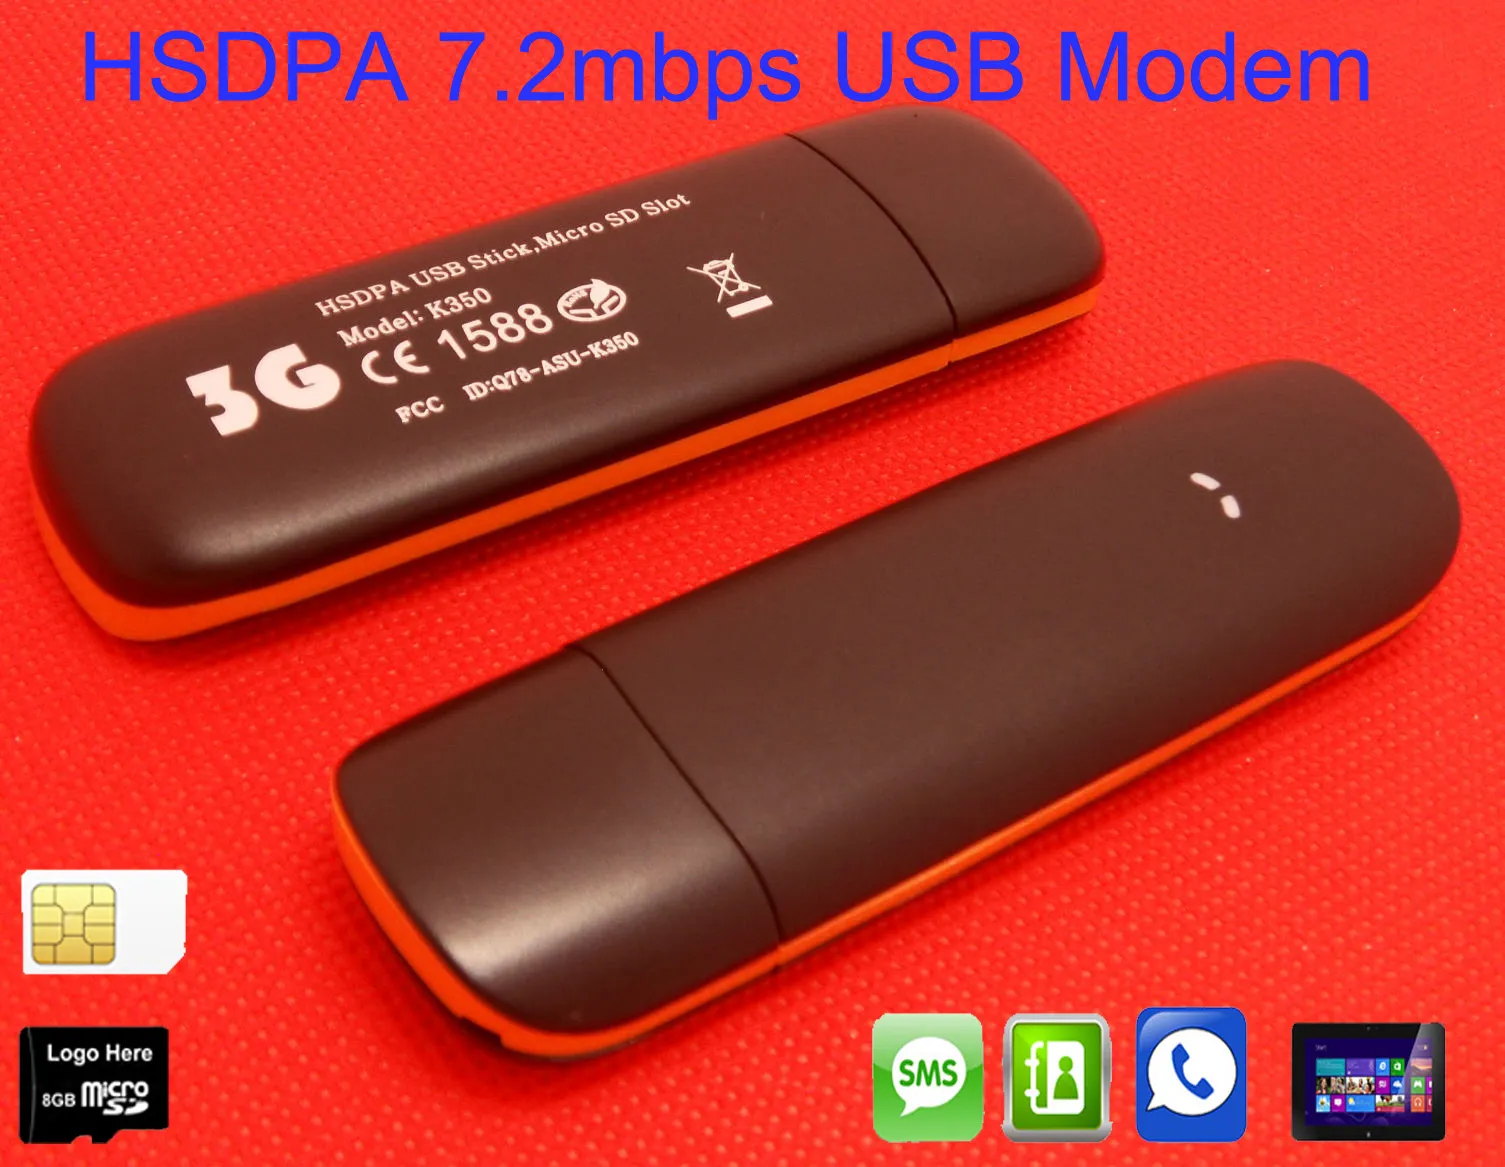 Anniv Coupon Below] Unlock Free Driver Download 7.2Mbps USB Modem UMTS 2100MHZ TF 3G Dongle Support Sim SLOT For Windows 7 8 Android Tablet Pc From Saffronflowerseeds, $10.06 | DHgate.Com